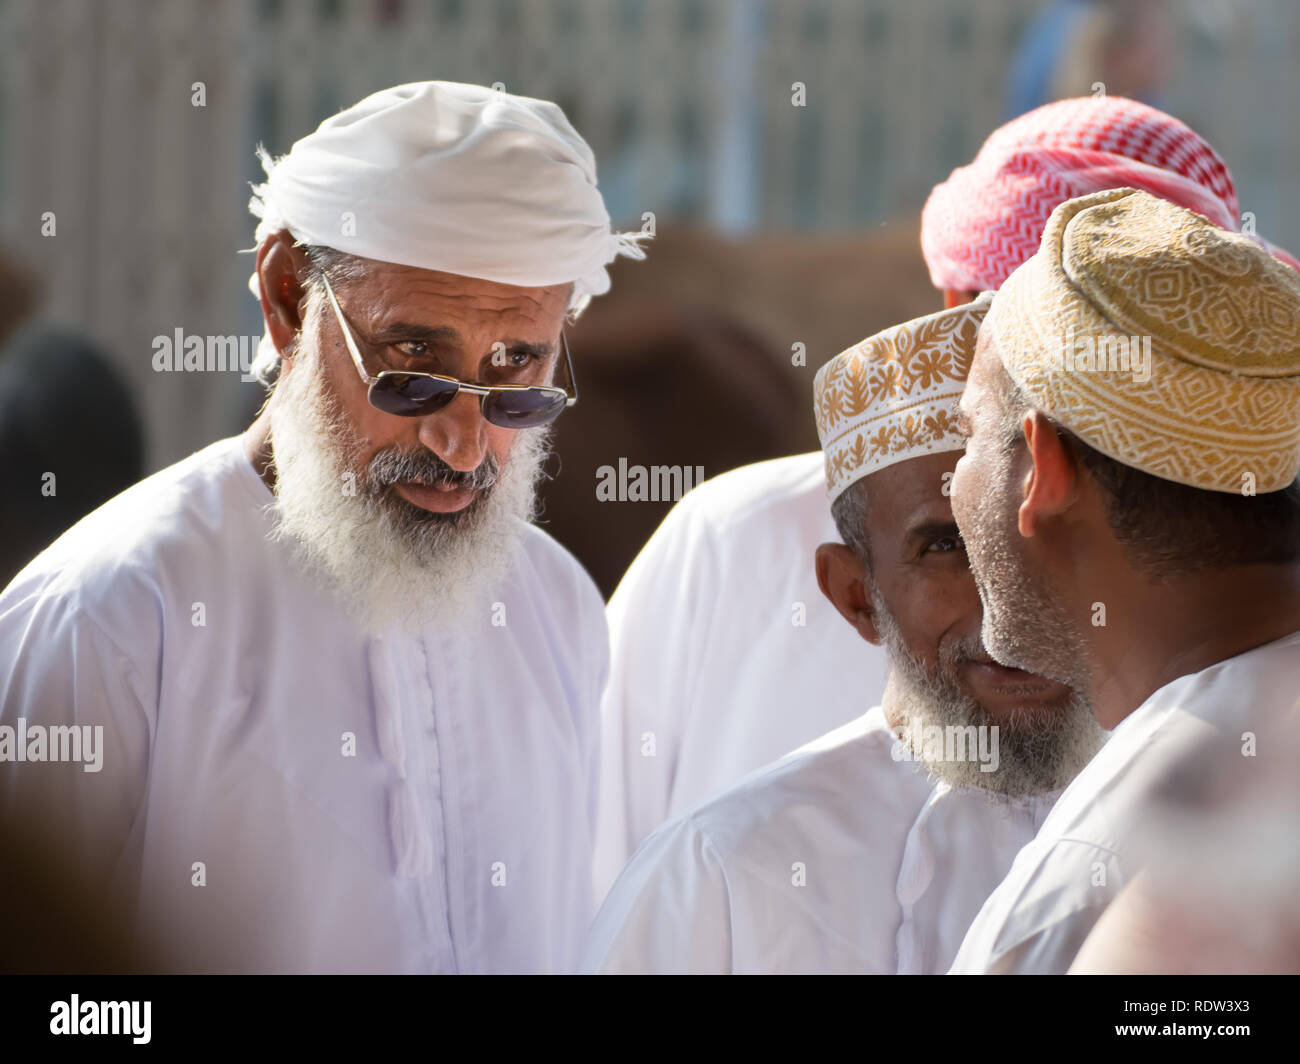 Nizwa, Oman - November 2, 2018: An expression of an Omani man who discusses with other men at the Friday market in Nizwa Stock Photo